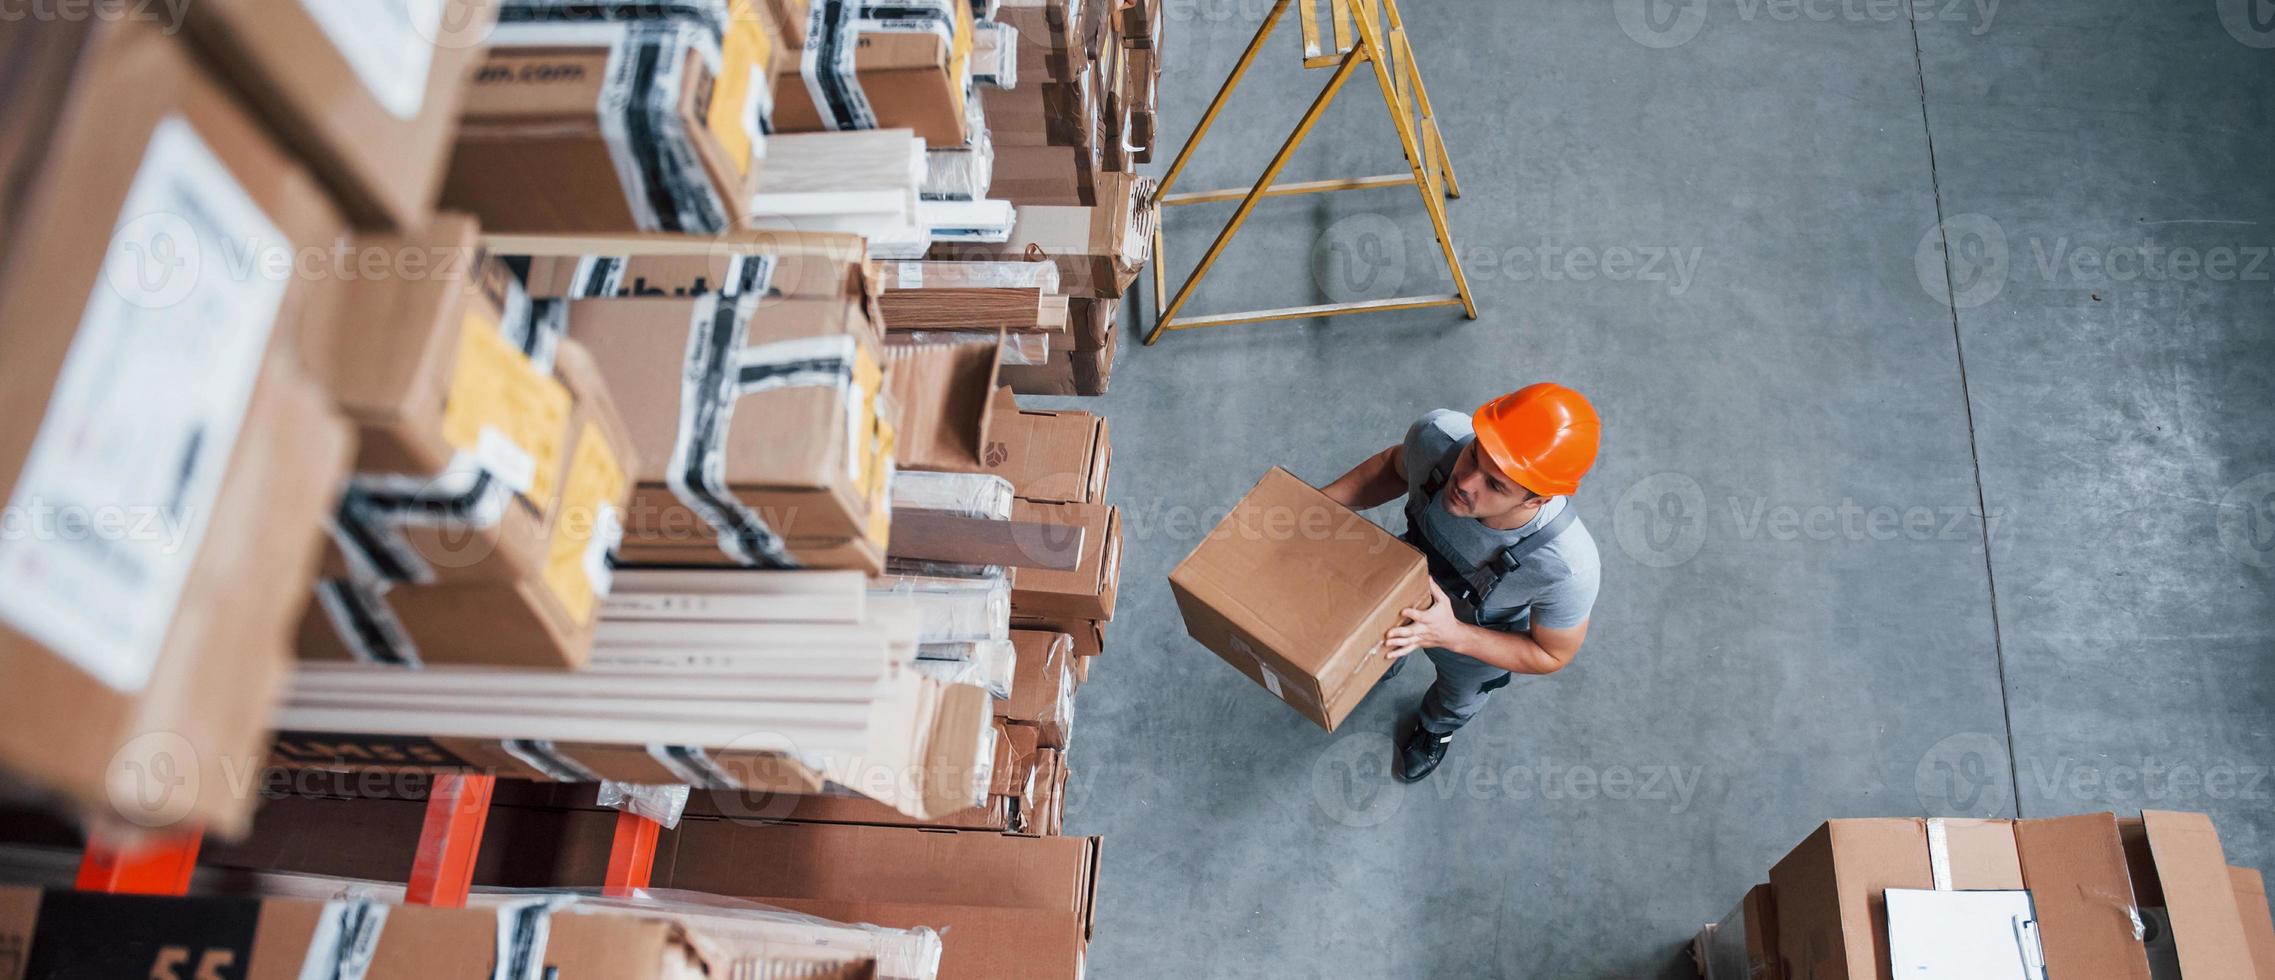 Top view of male worker in warehouse with box in hands photo